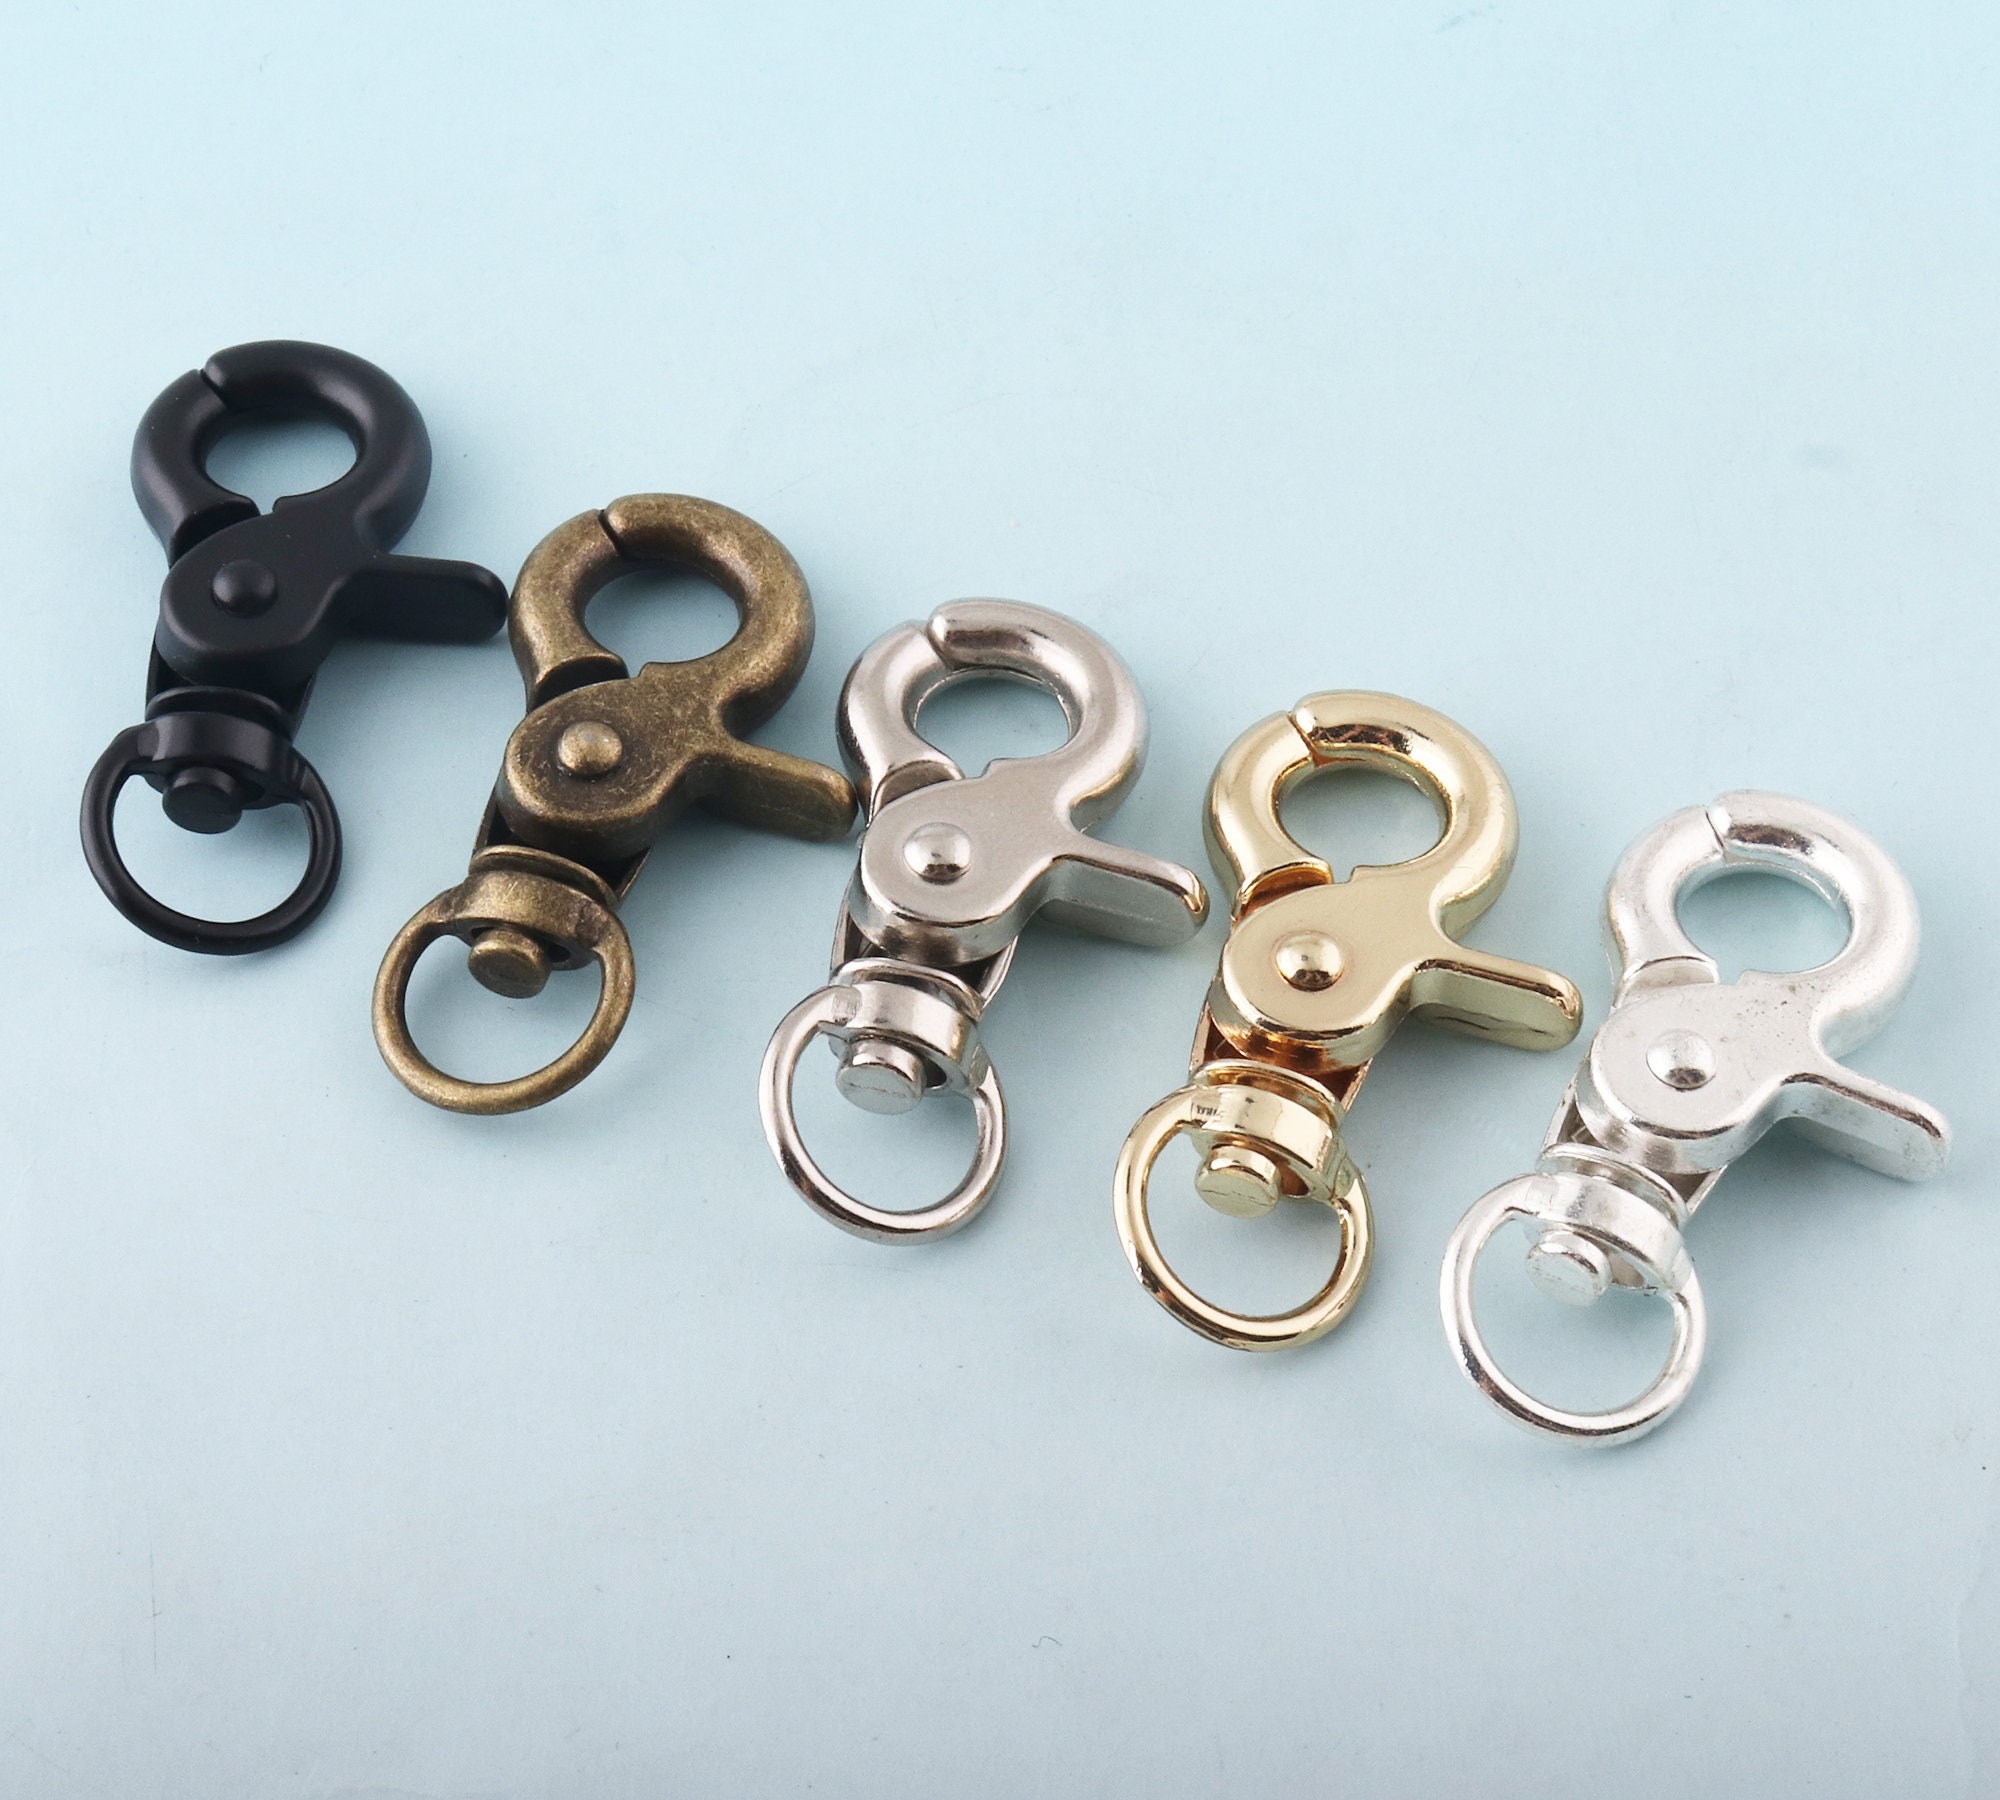 5, 10, or 15 Iron Swivel Lobster Claw Clasps, Platinum, 1inch D-ring,  Lanyard Connector, Keychains, DIY Kid's Crafts, Purse Strap, Dog Leash 